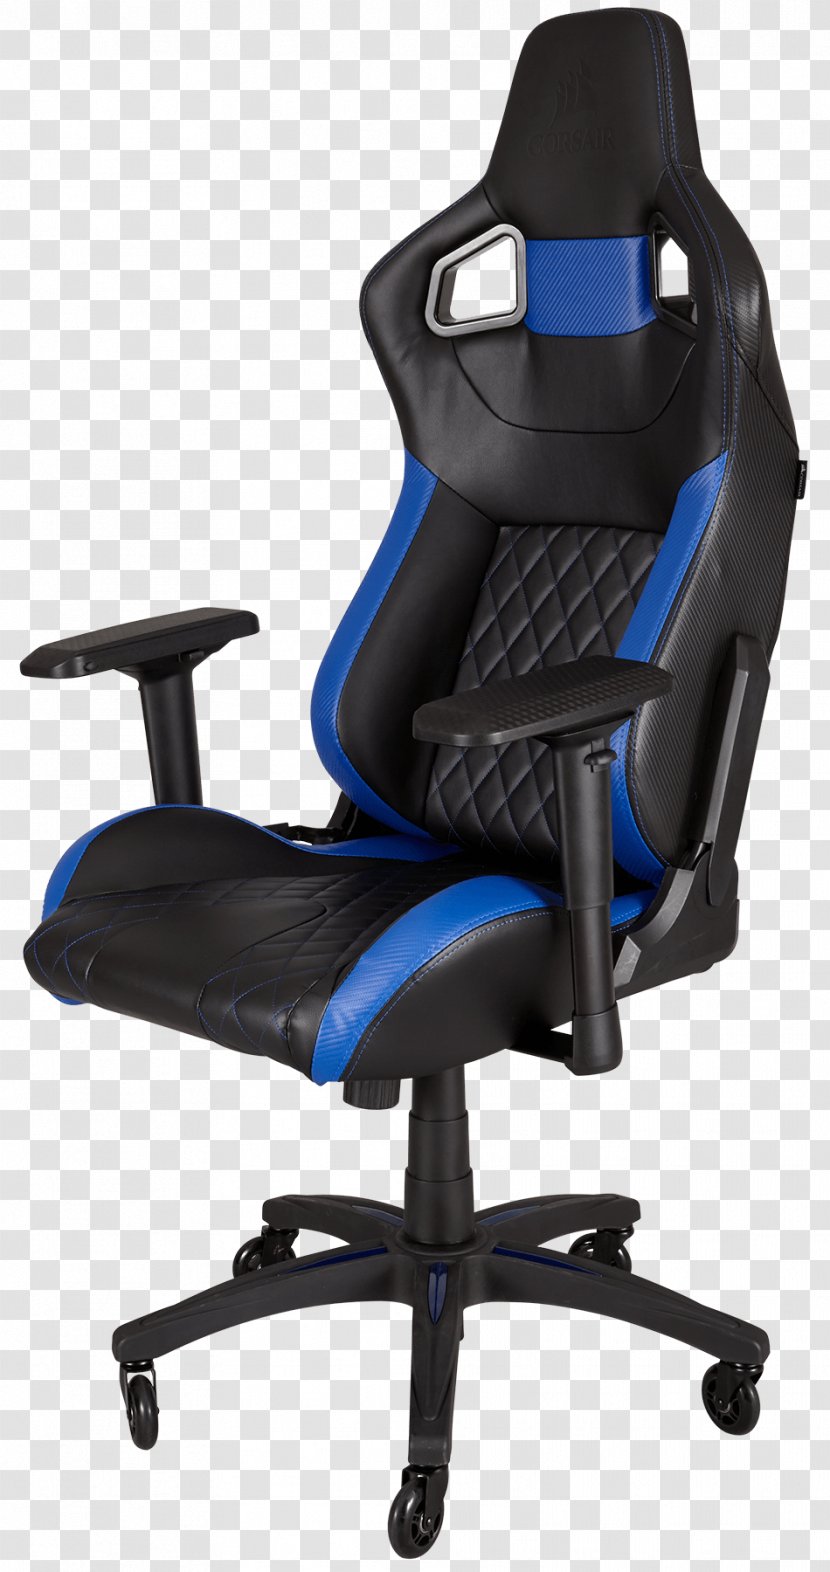 Gaming Chair Office & Desk Chairs Furniture DXRacer Transparent PNG